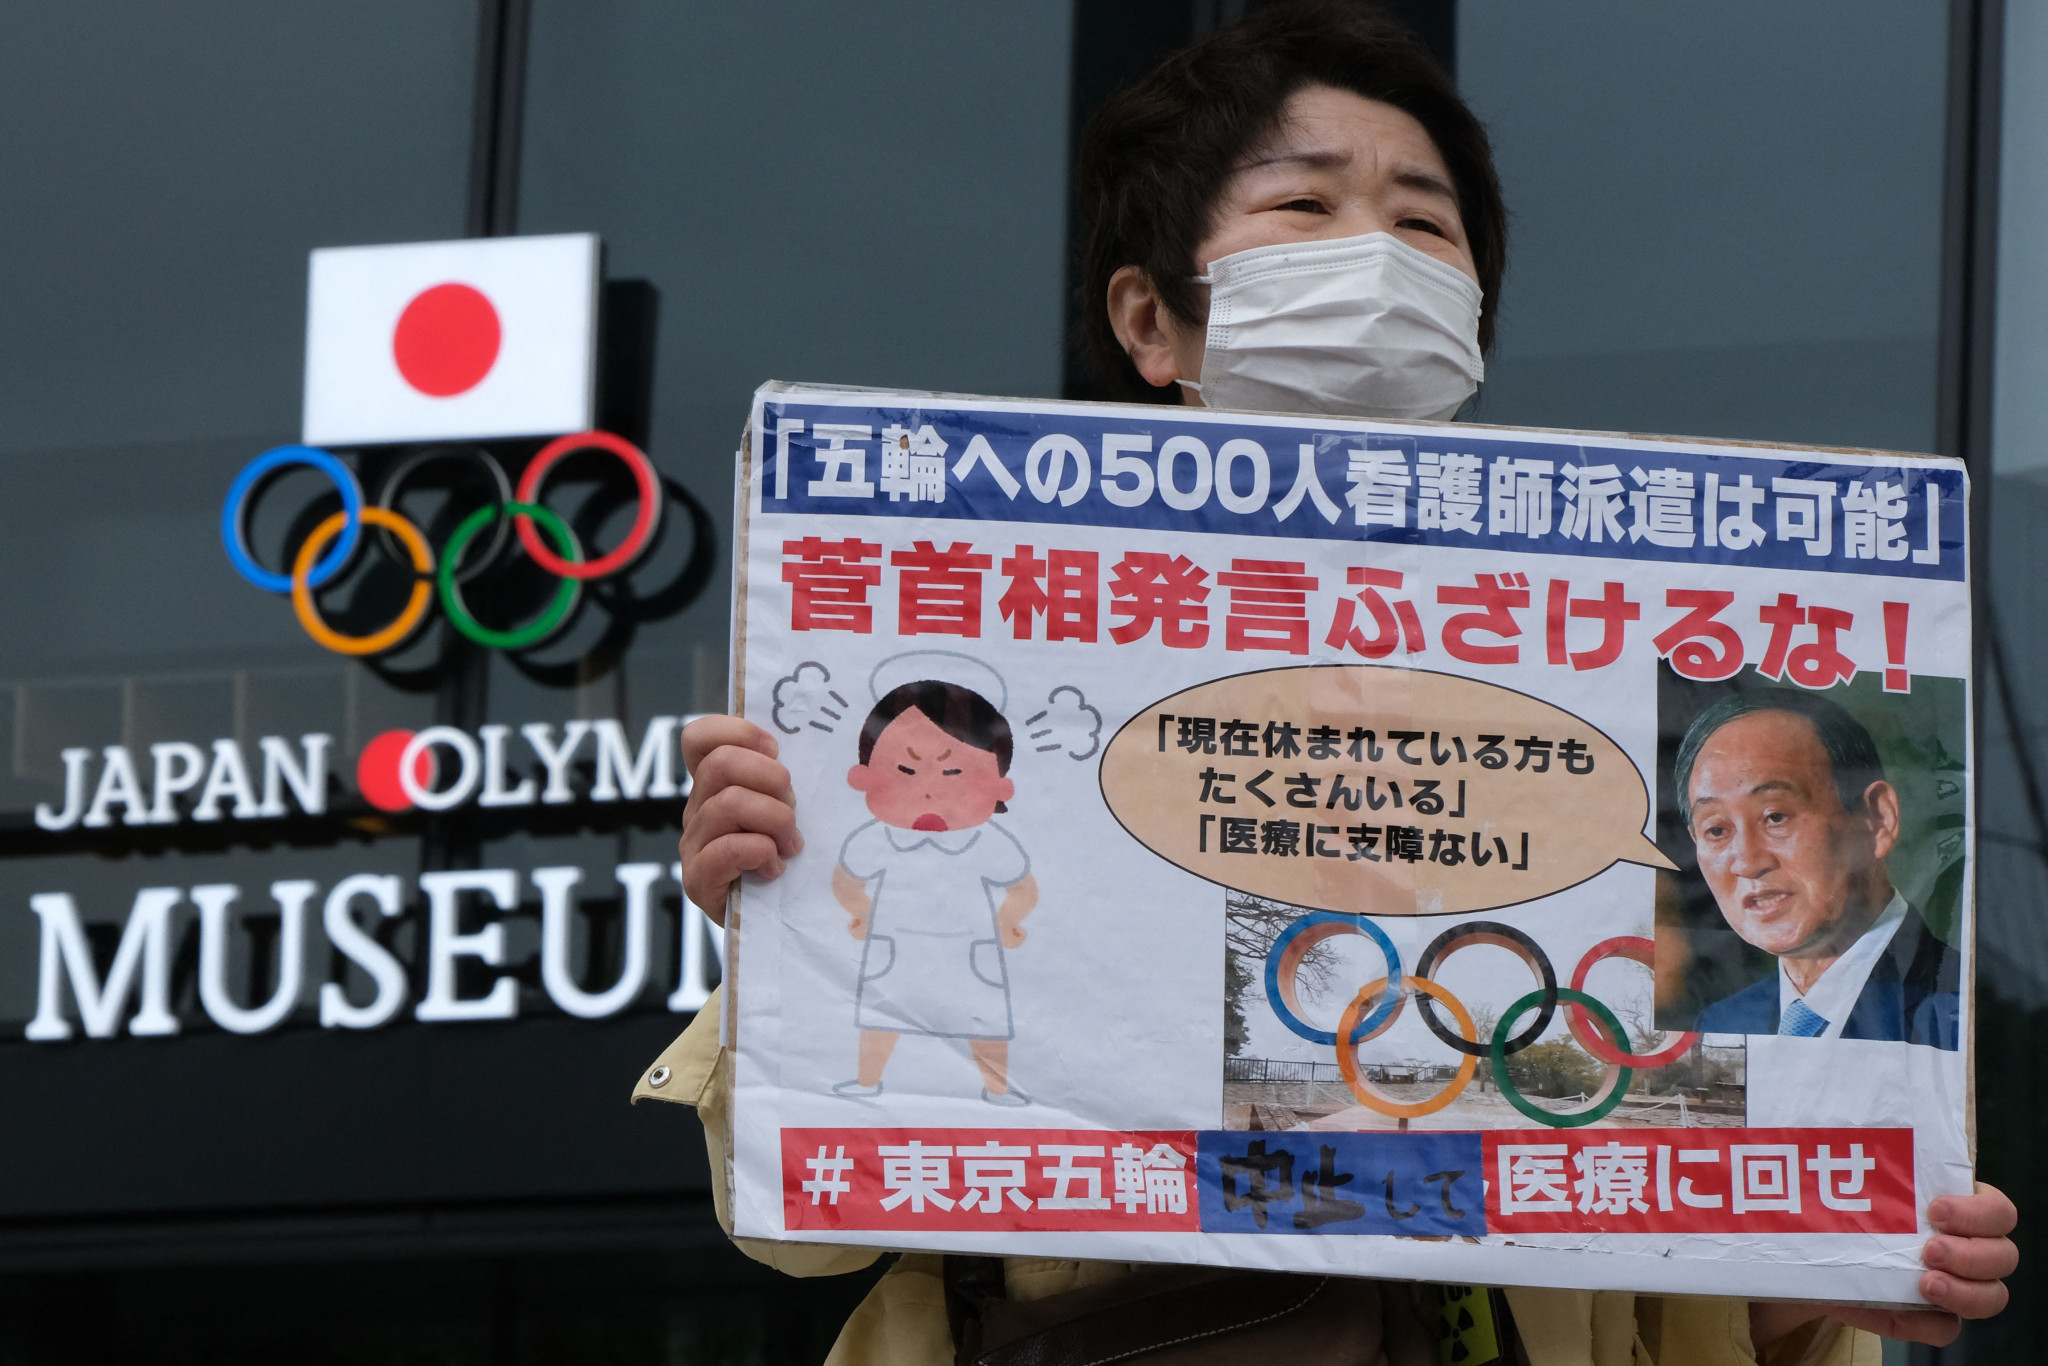 Protests+Tokyo+2020+GettyImages-1232961122.jpg